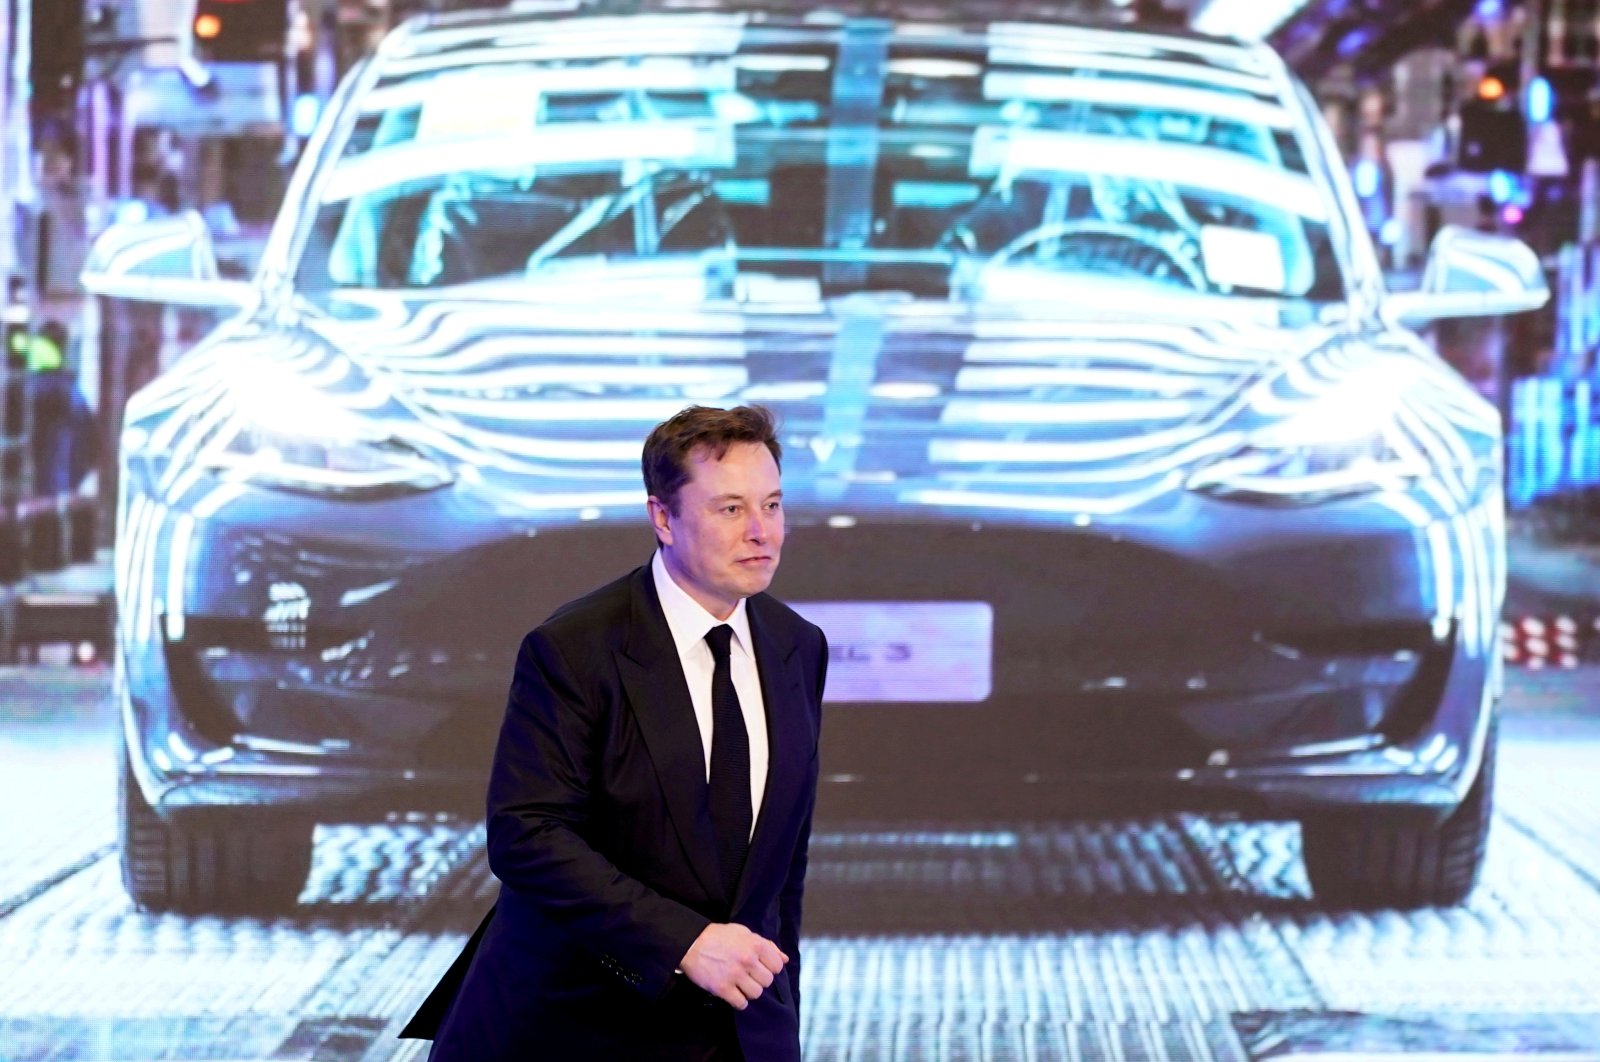 Tesla CEO Elon Musk walks next to a screen showing an image of the Tesla Model 3 car during the opening ceremony of the Tesla China-made Model Y program in Shanghai, China, Jan. 7, 2020. (Reuters Photo)